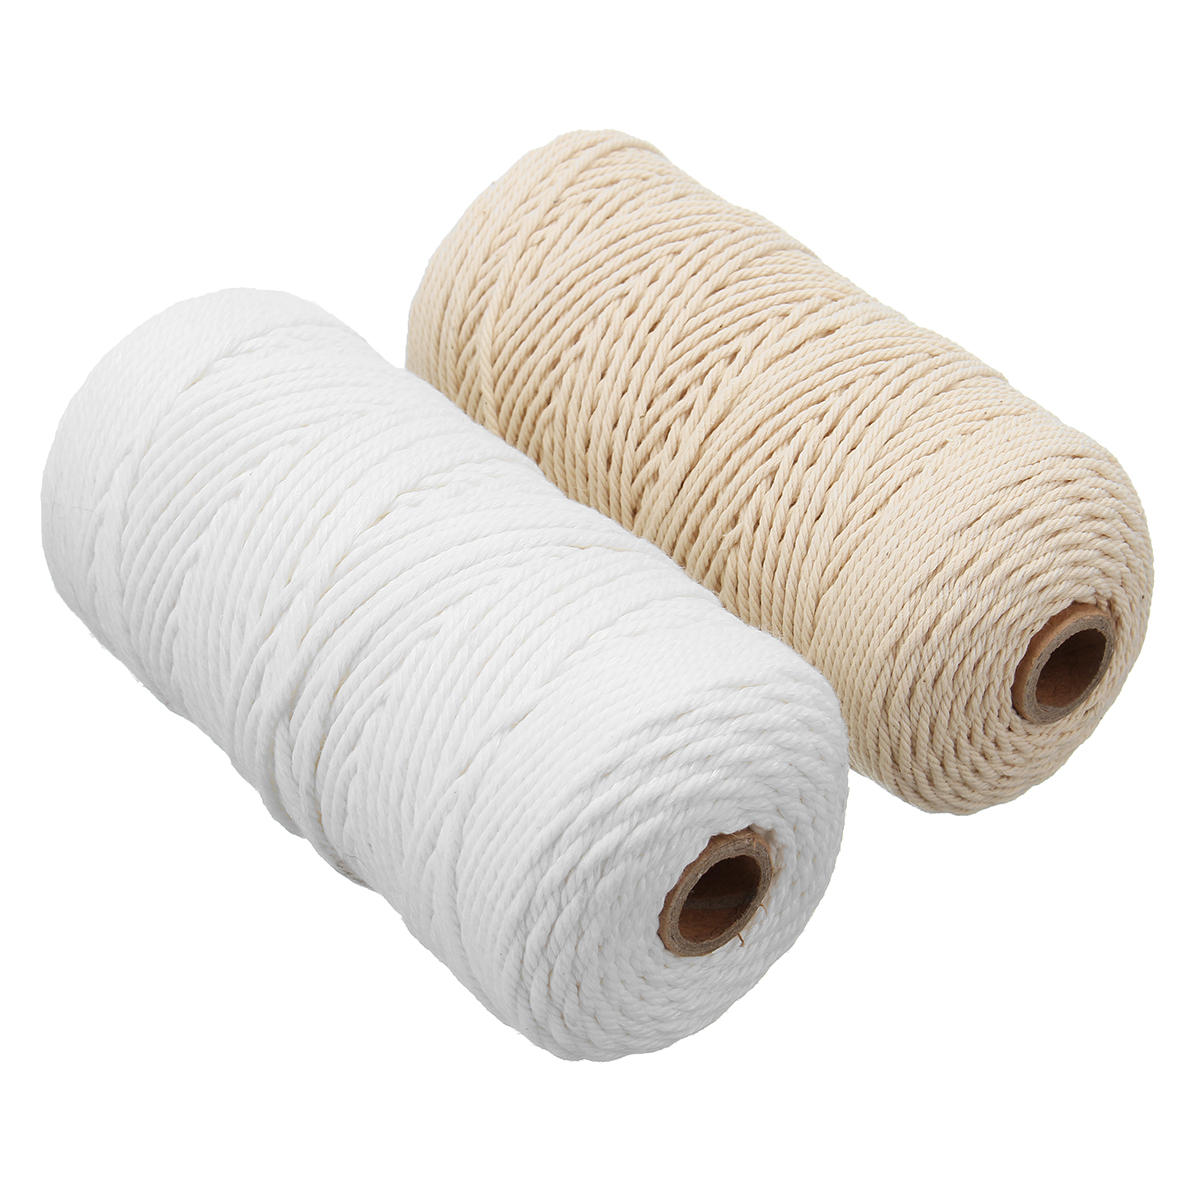 

2mm x 200m Natural Beige White Twisted 100% Pure Cotton Cord Rope DIY Crafts Macrame String